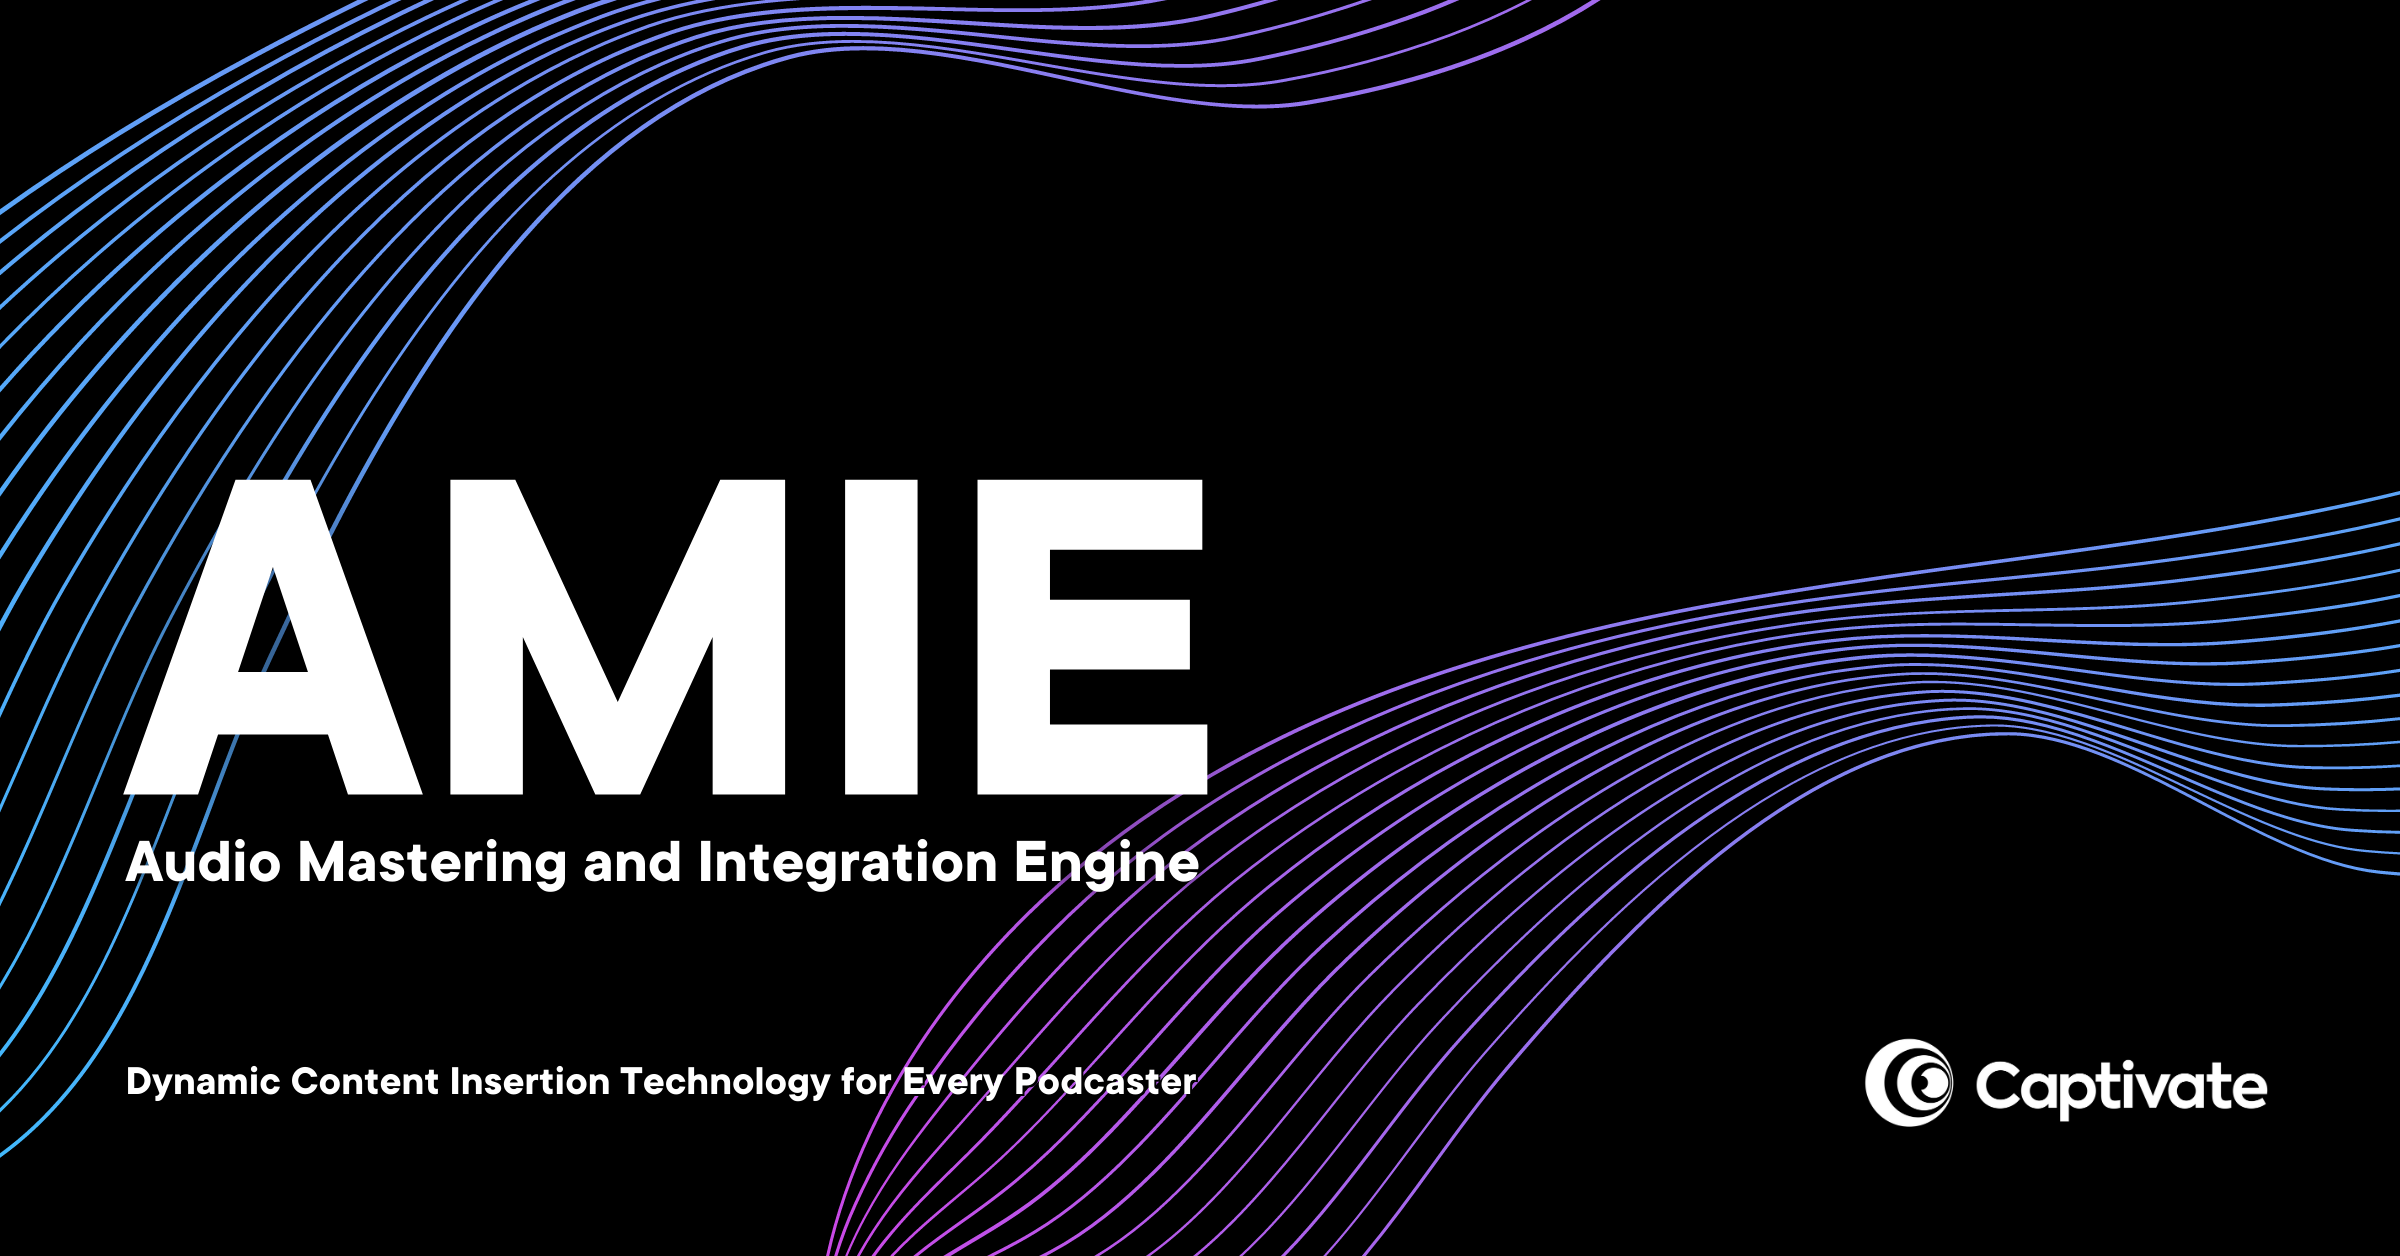 Introducing AMIE, Captivate's Audio Mastering and Integration Engine